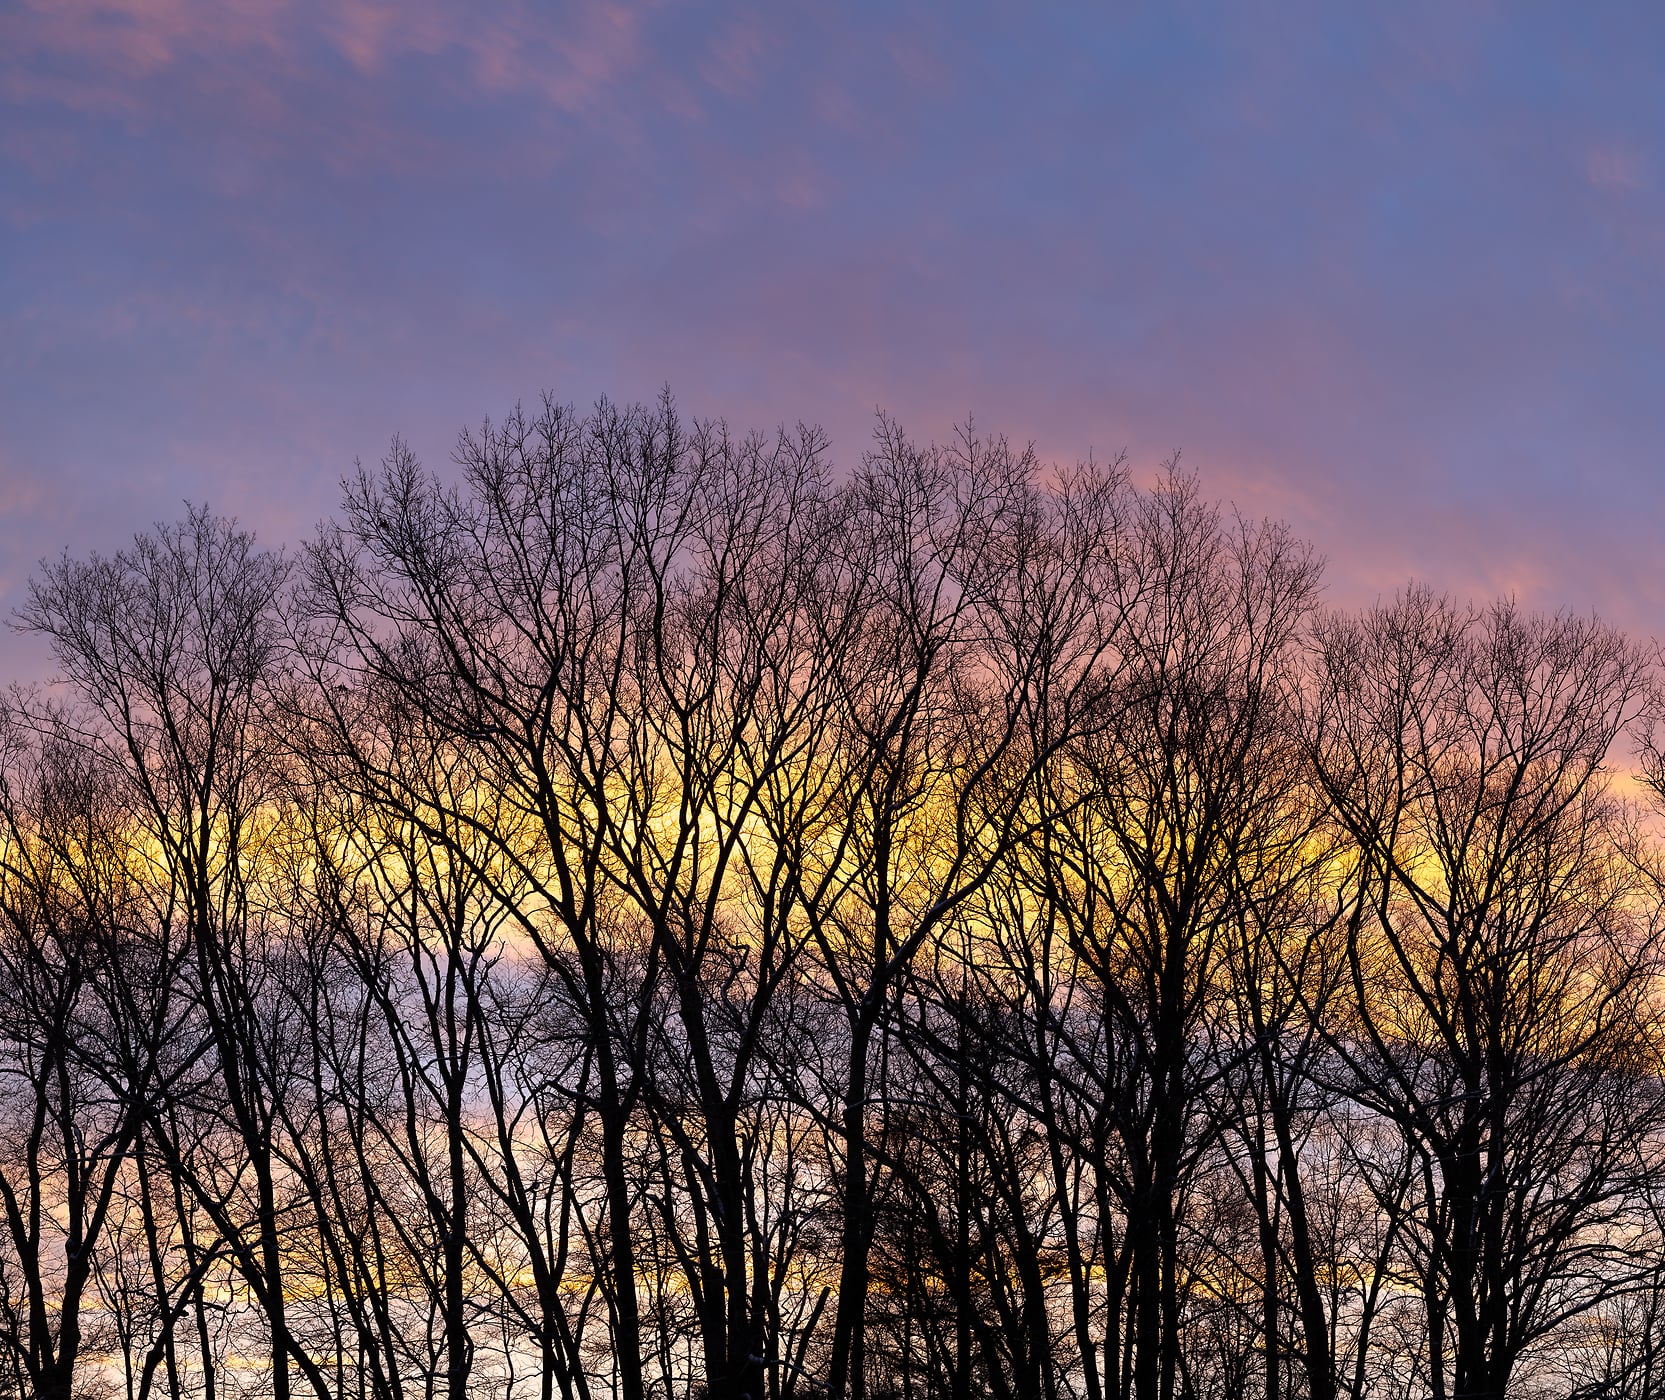 401 megapixels! A very high resolution, large-format VAST photo of silhouettes of trees at sunrise; nature photograph created by Greg Probst in Hampton Falls, New Hampshire.